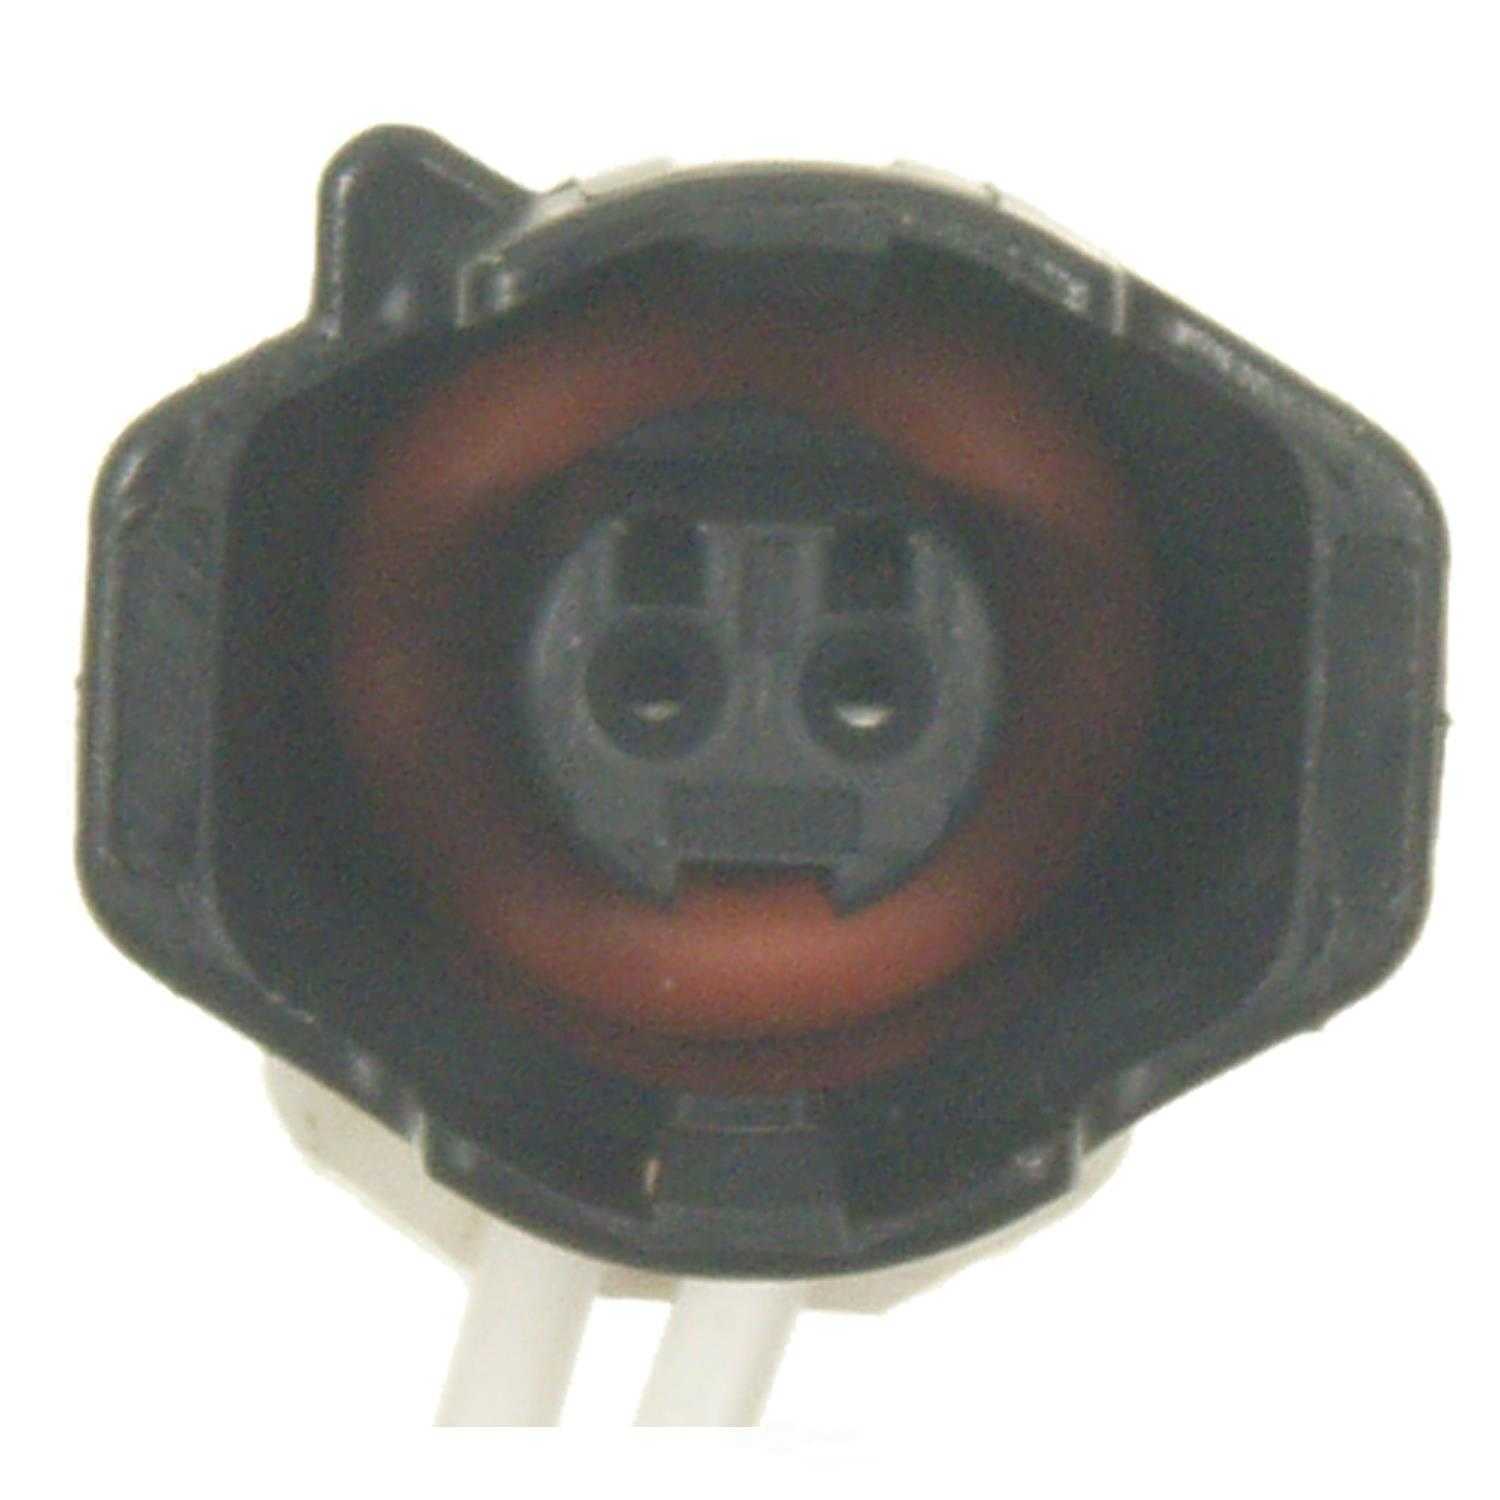 STANDARD MOTOR PRODUCTS - Automatic Transmission Fluid Temperature Sensor Connector - STA S-1170